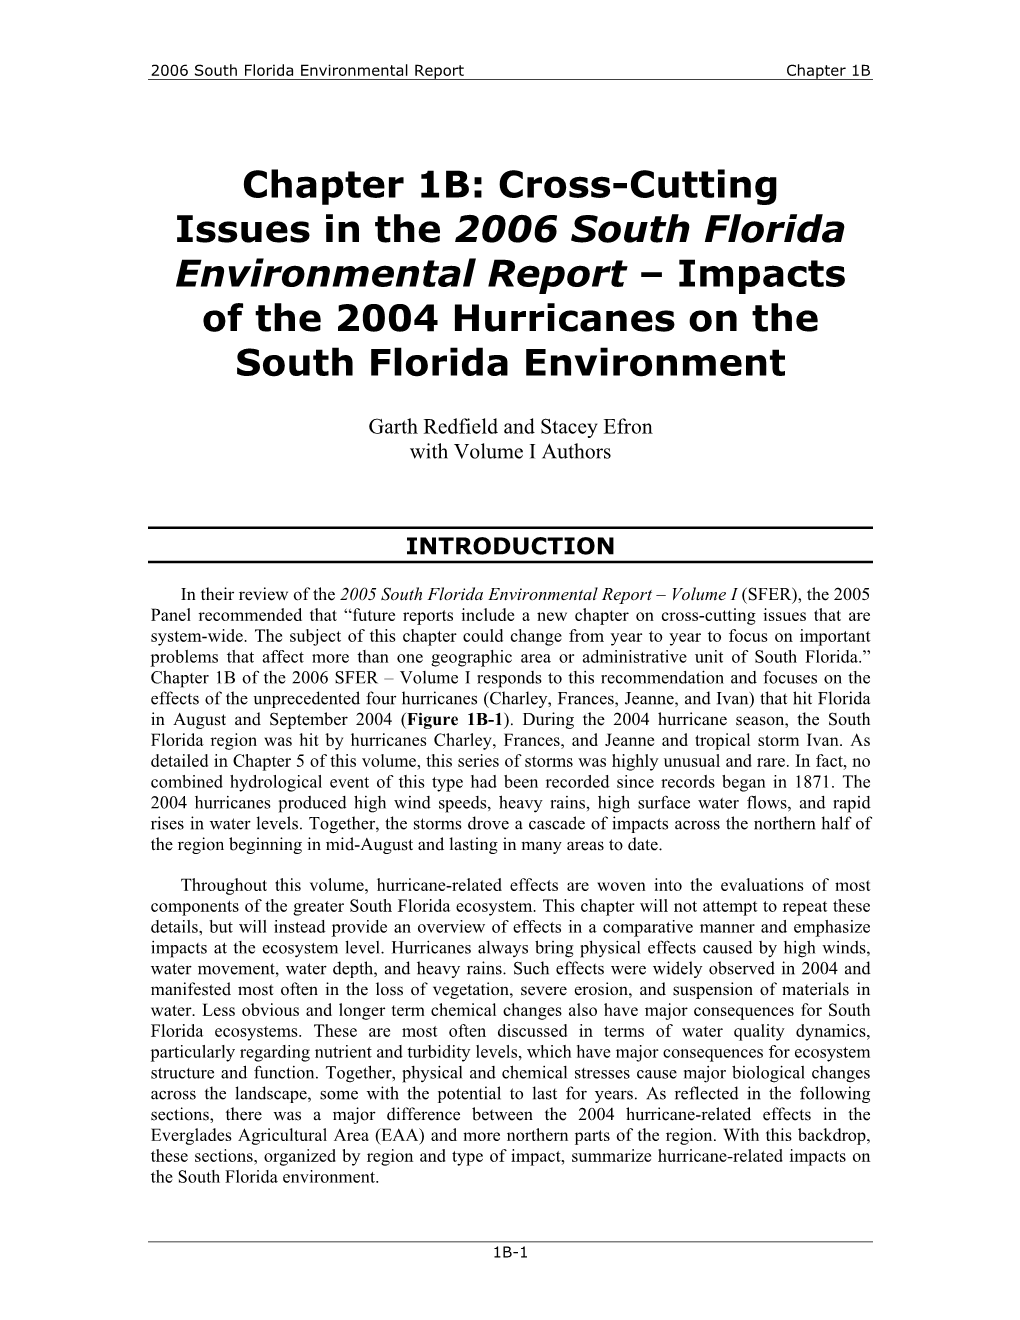 Cross-Cutting Issues in the 2006 South Florida Environmental Report – Impacts of the 2004 Hurricanes on the South Florida Environment